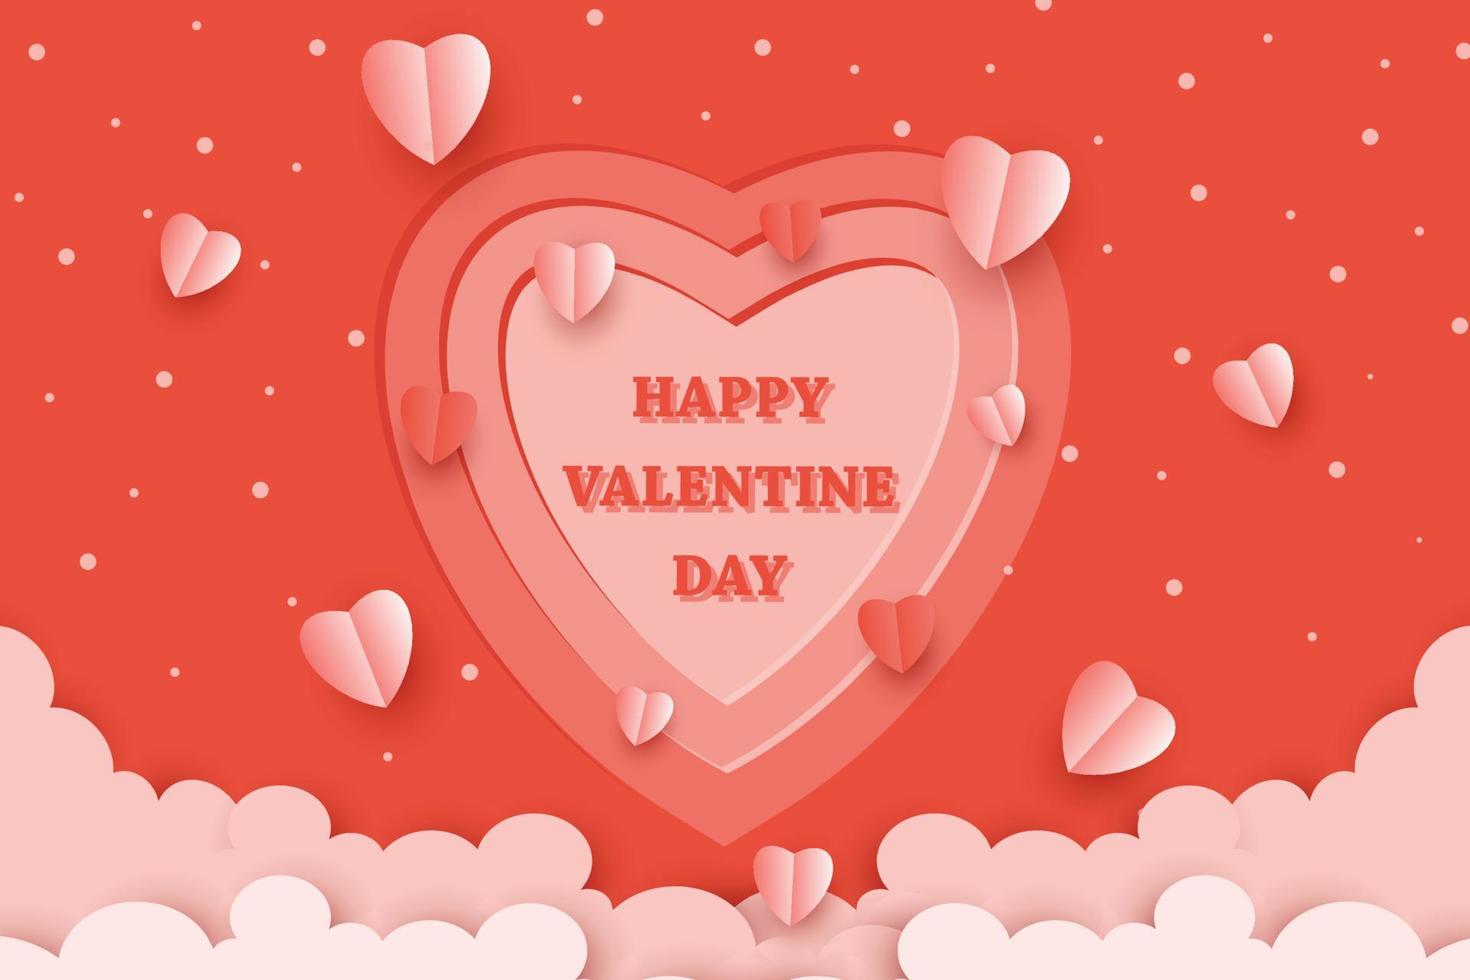 happy valentine's day greeting template background vector, red cute paper cut style design with clouds and flying hearts in sky vector